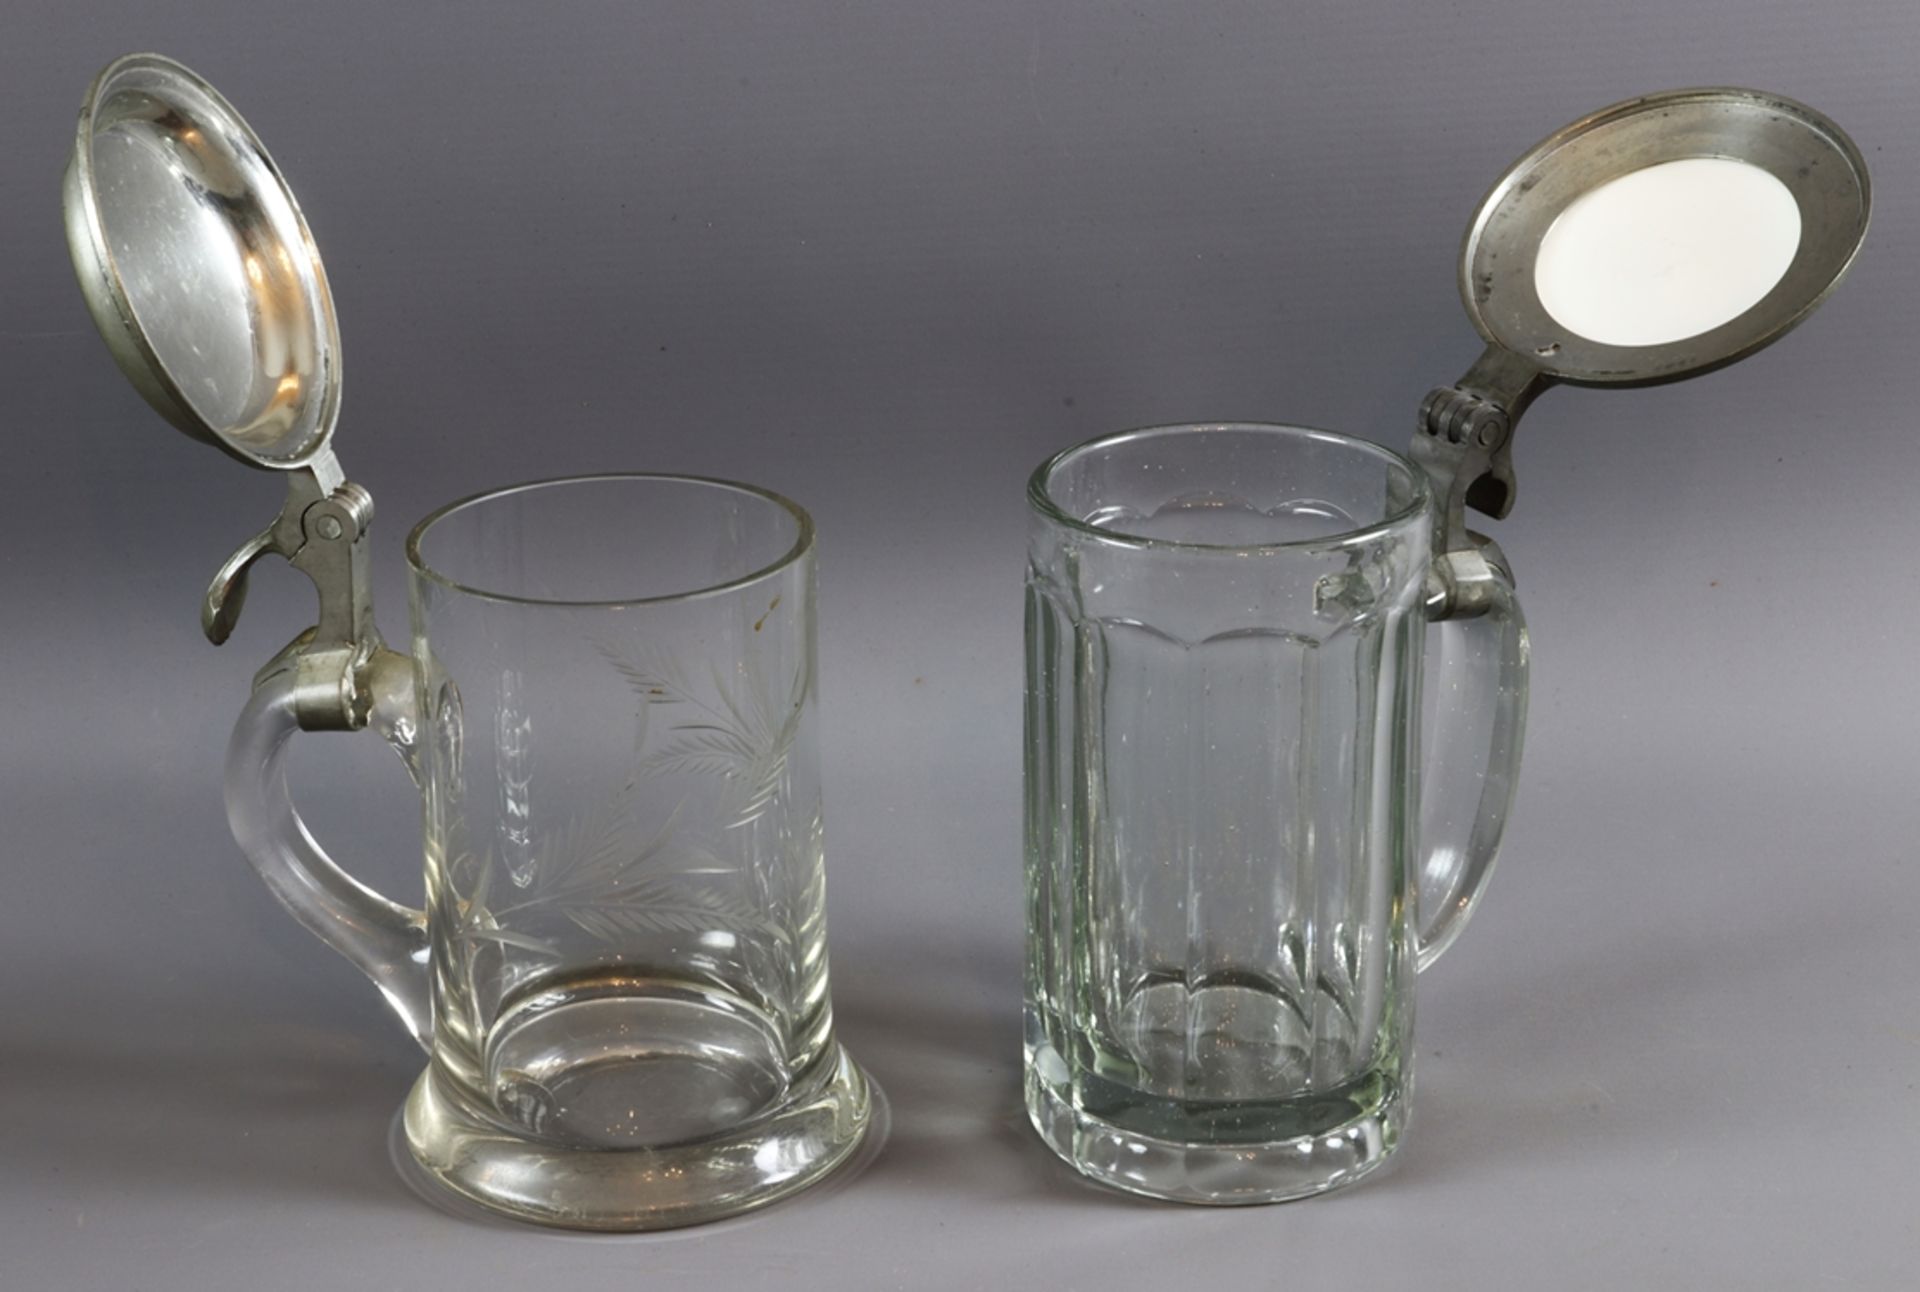 Five glass jugs of various types, Historicism circa 1890 - 1920, German - Image 4 of 7